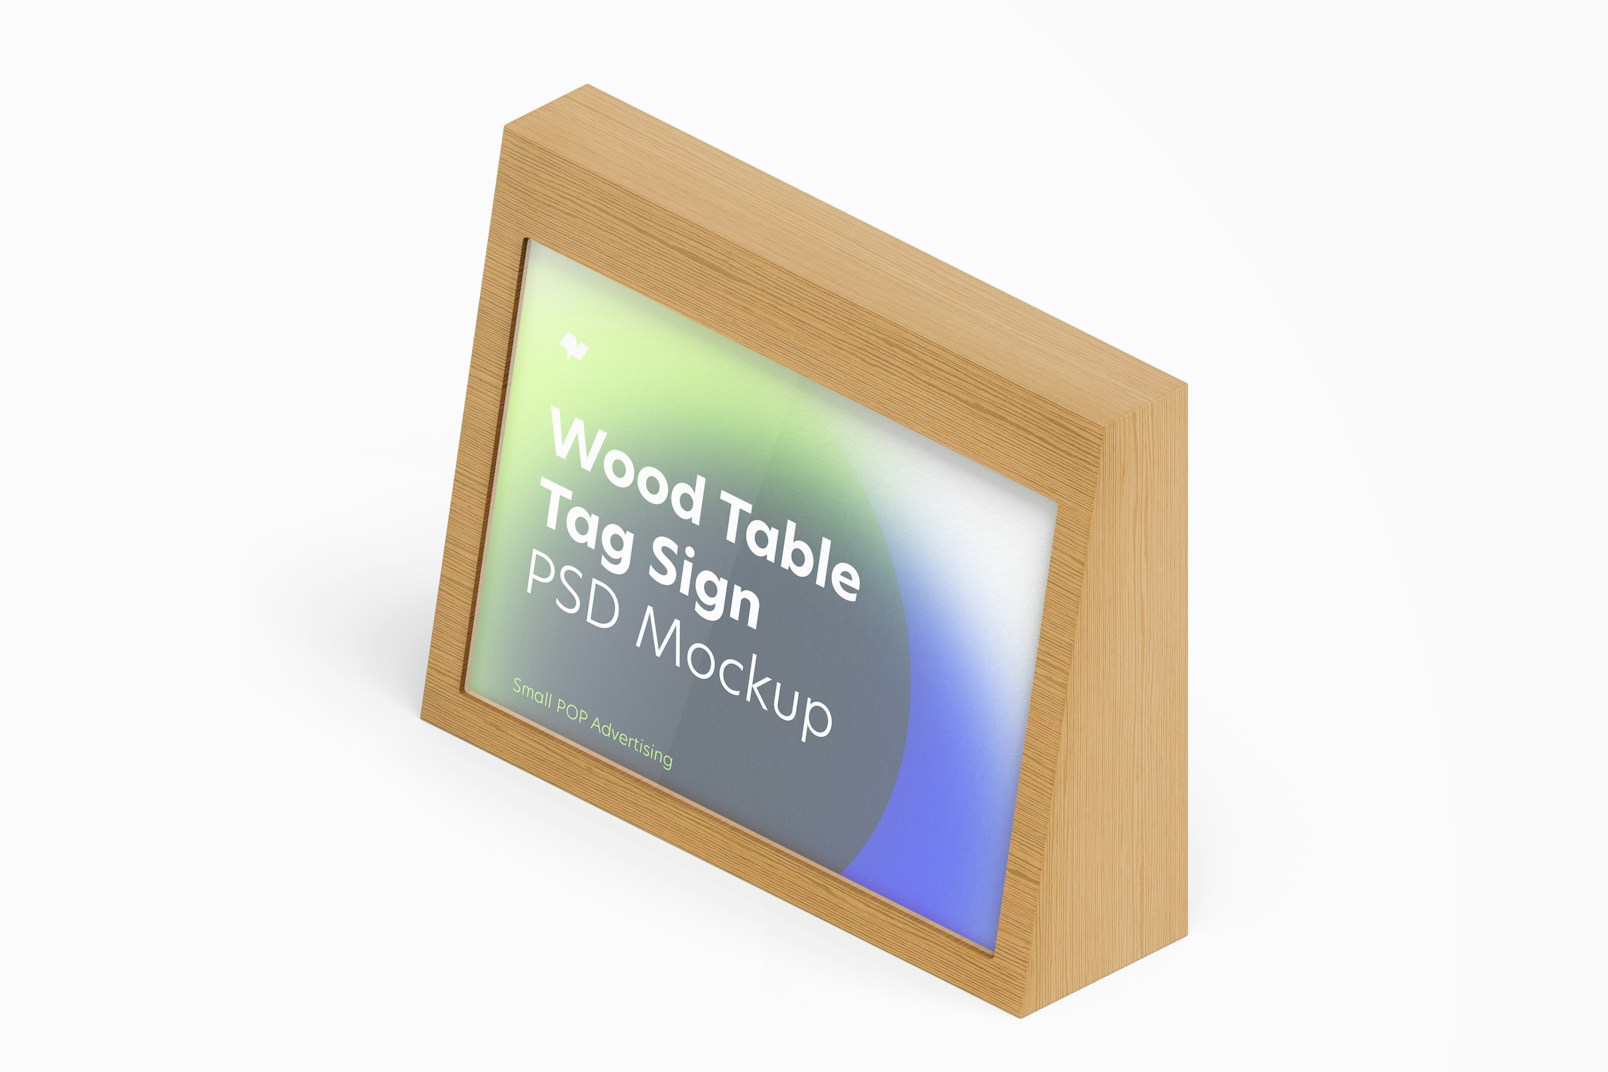 Wood Table Advertising Tag Sign Mockup, Isometric Left View